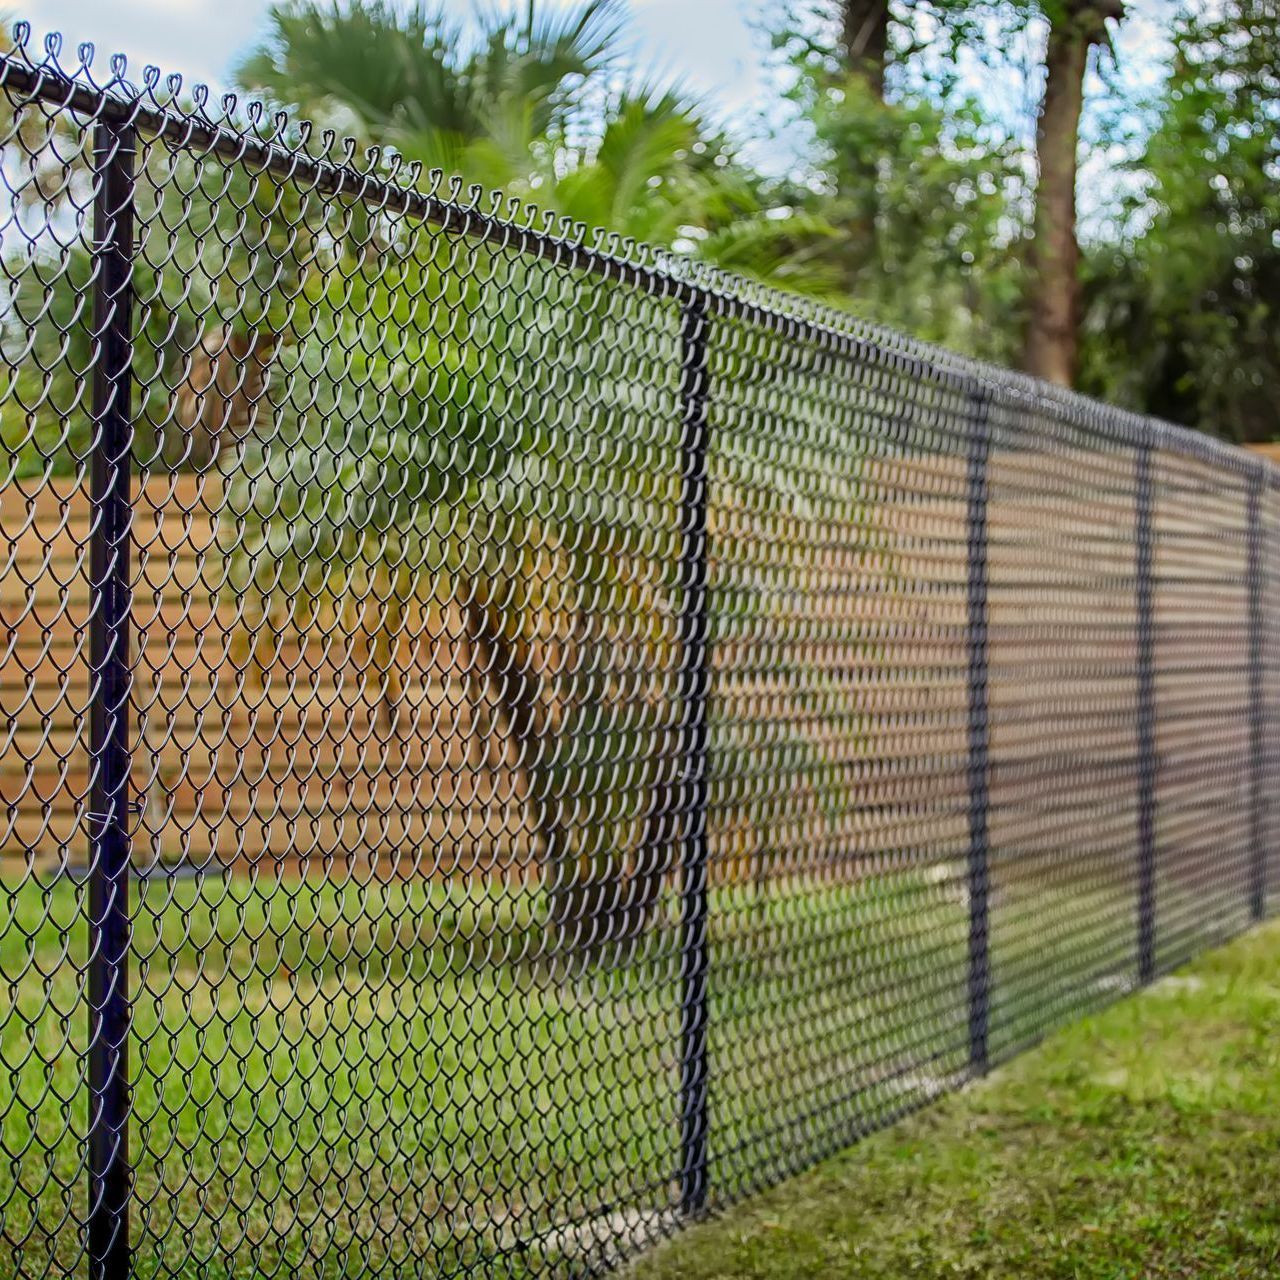 A chain link fence is surrounded by a wooden fence in a backyard.